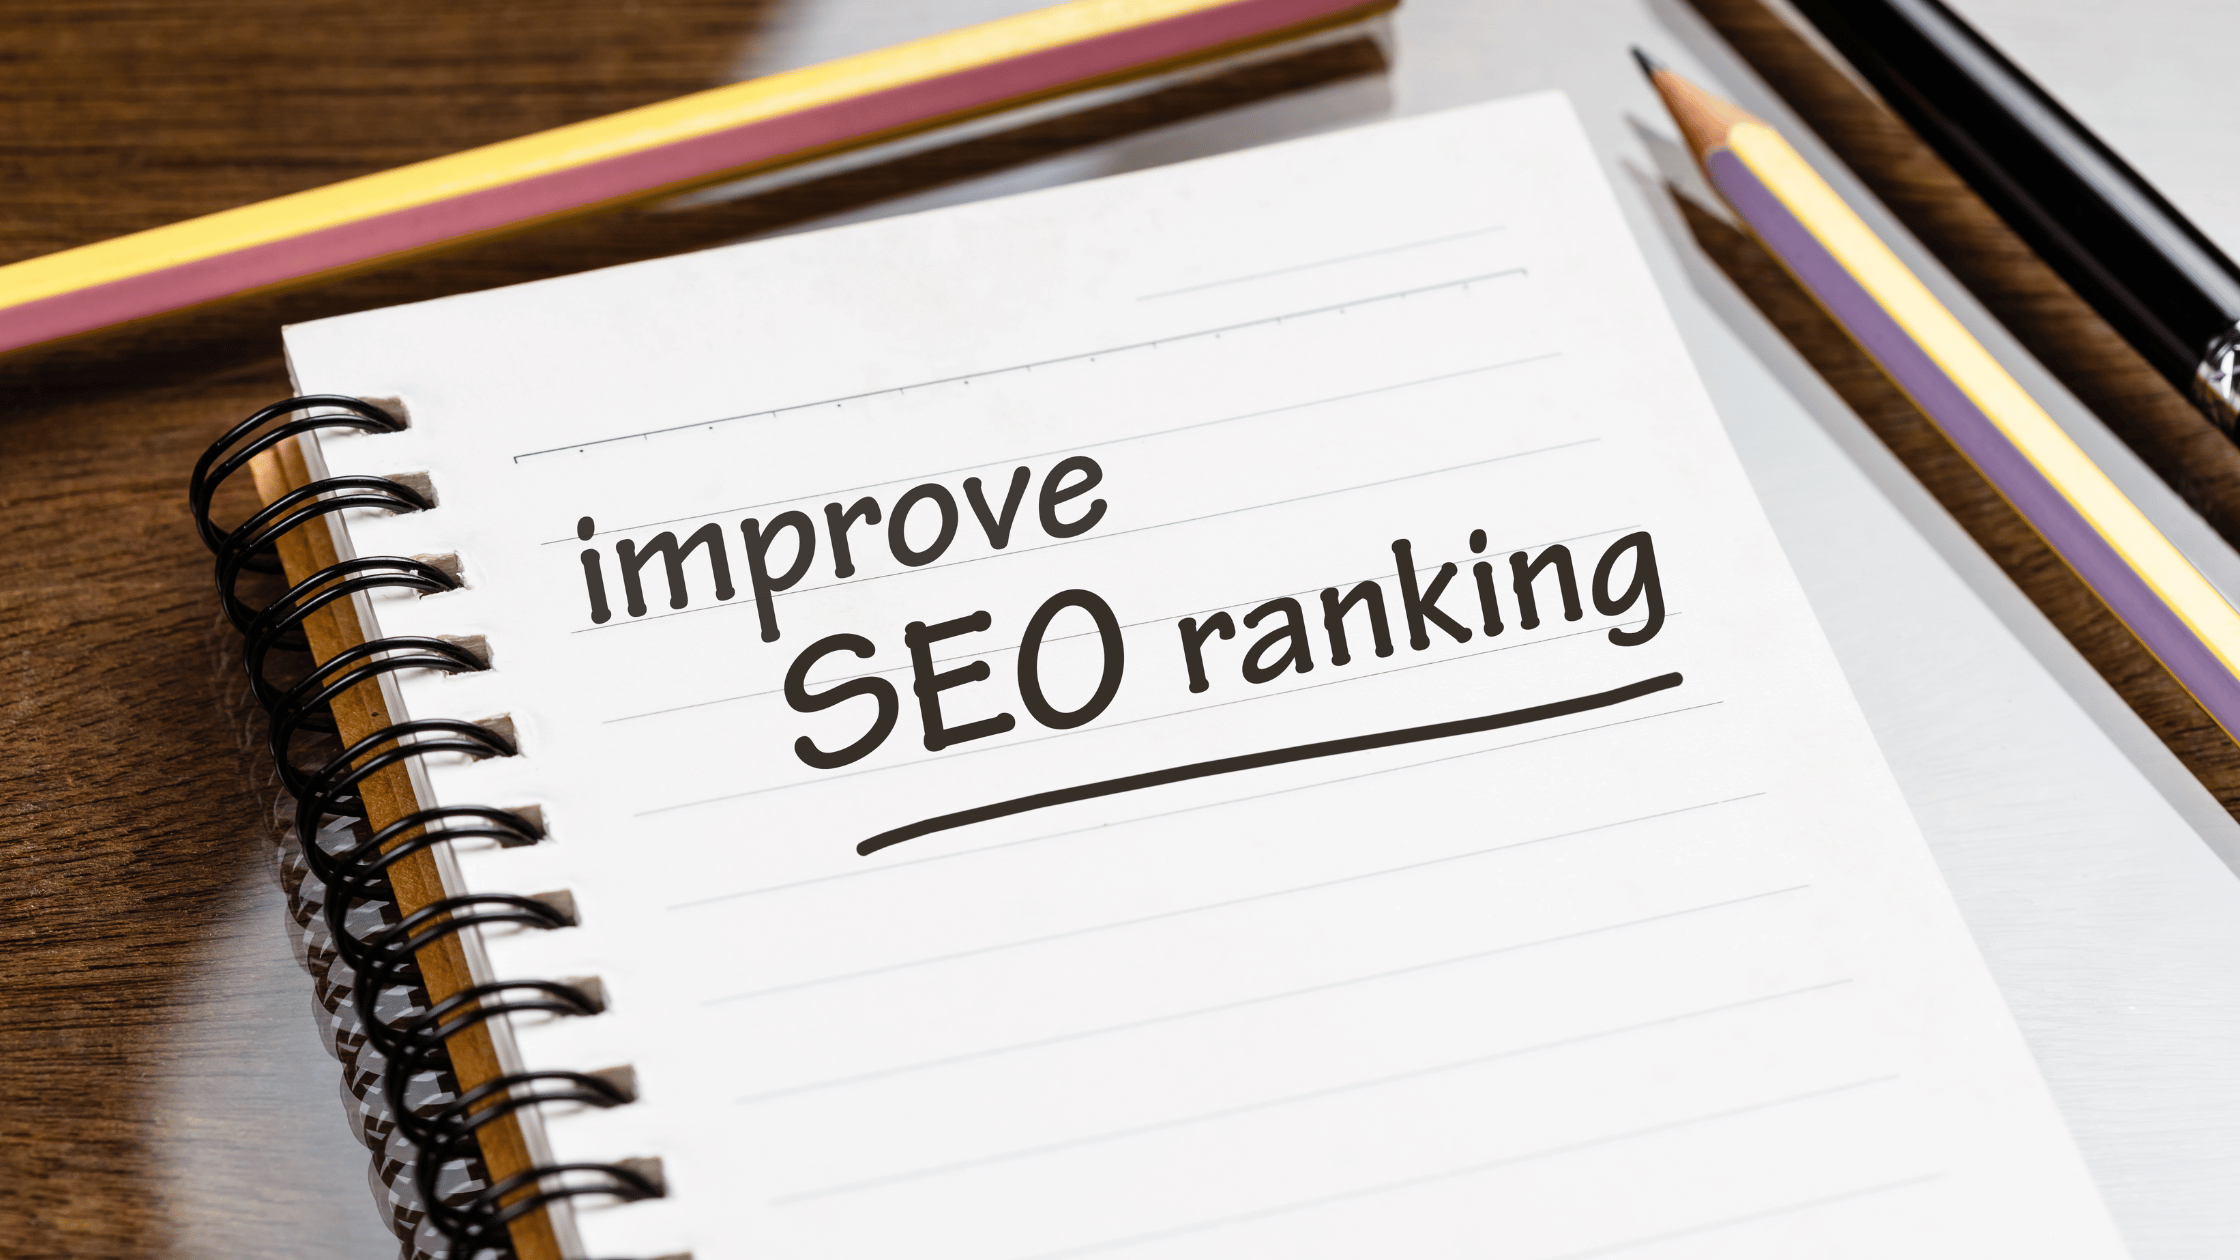 Internal linking best practices to follow for better google ranking